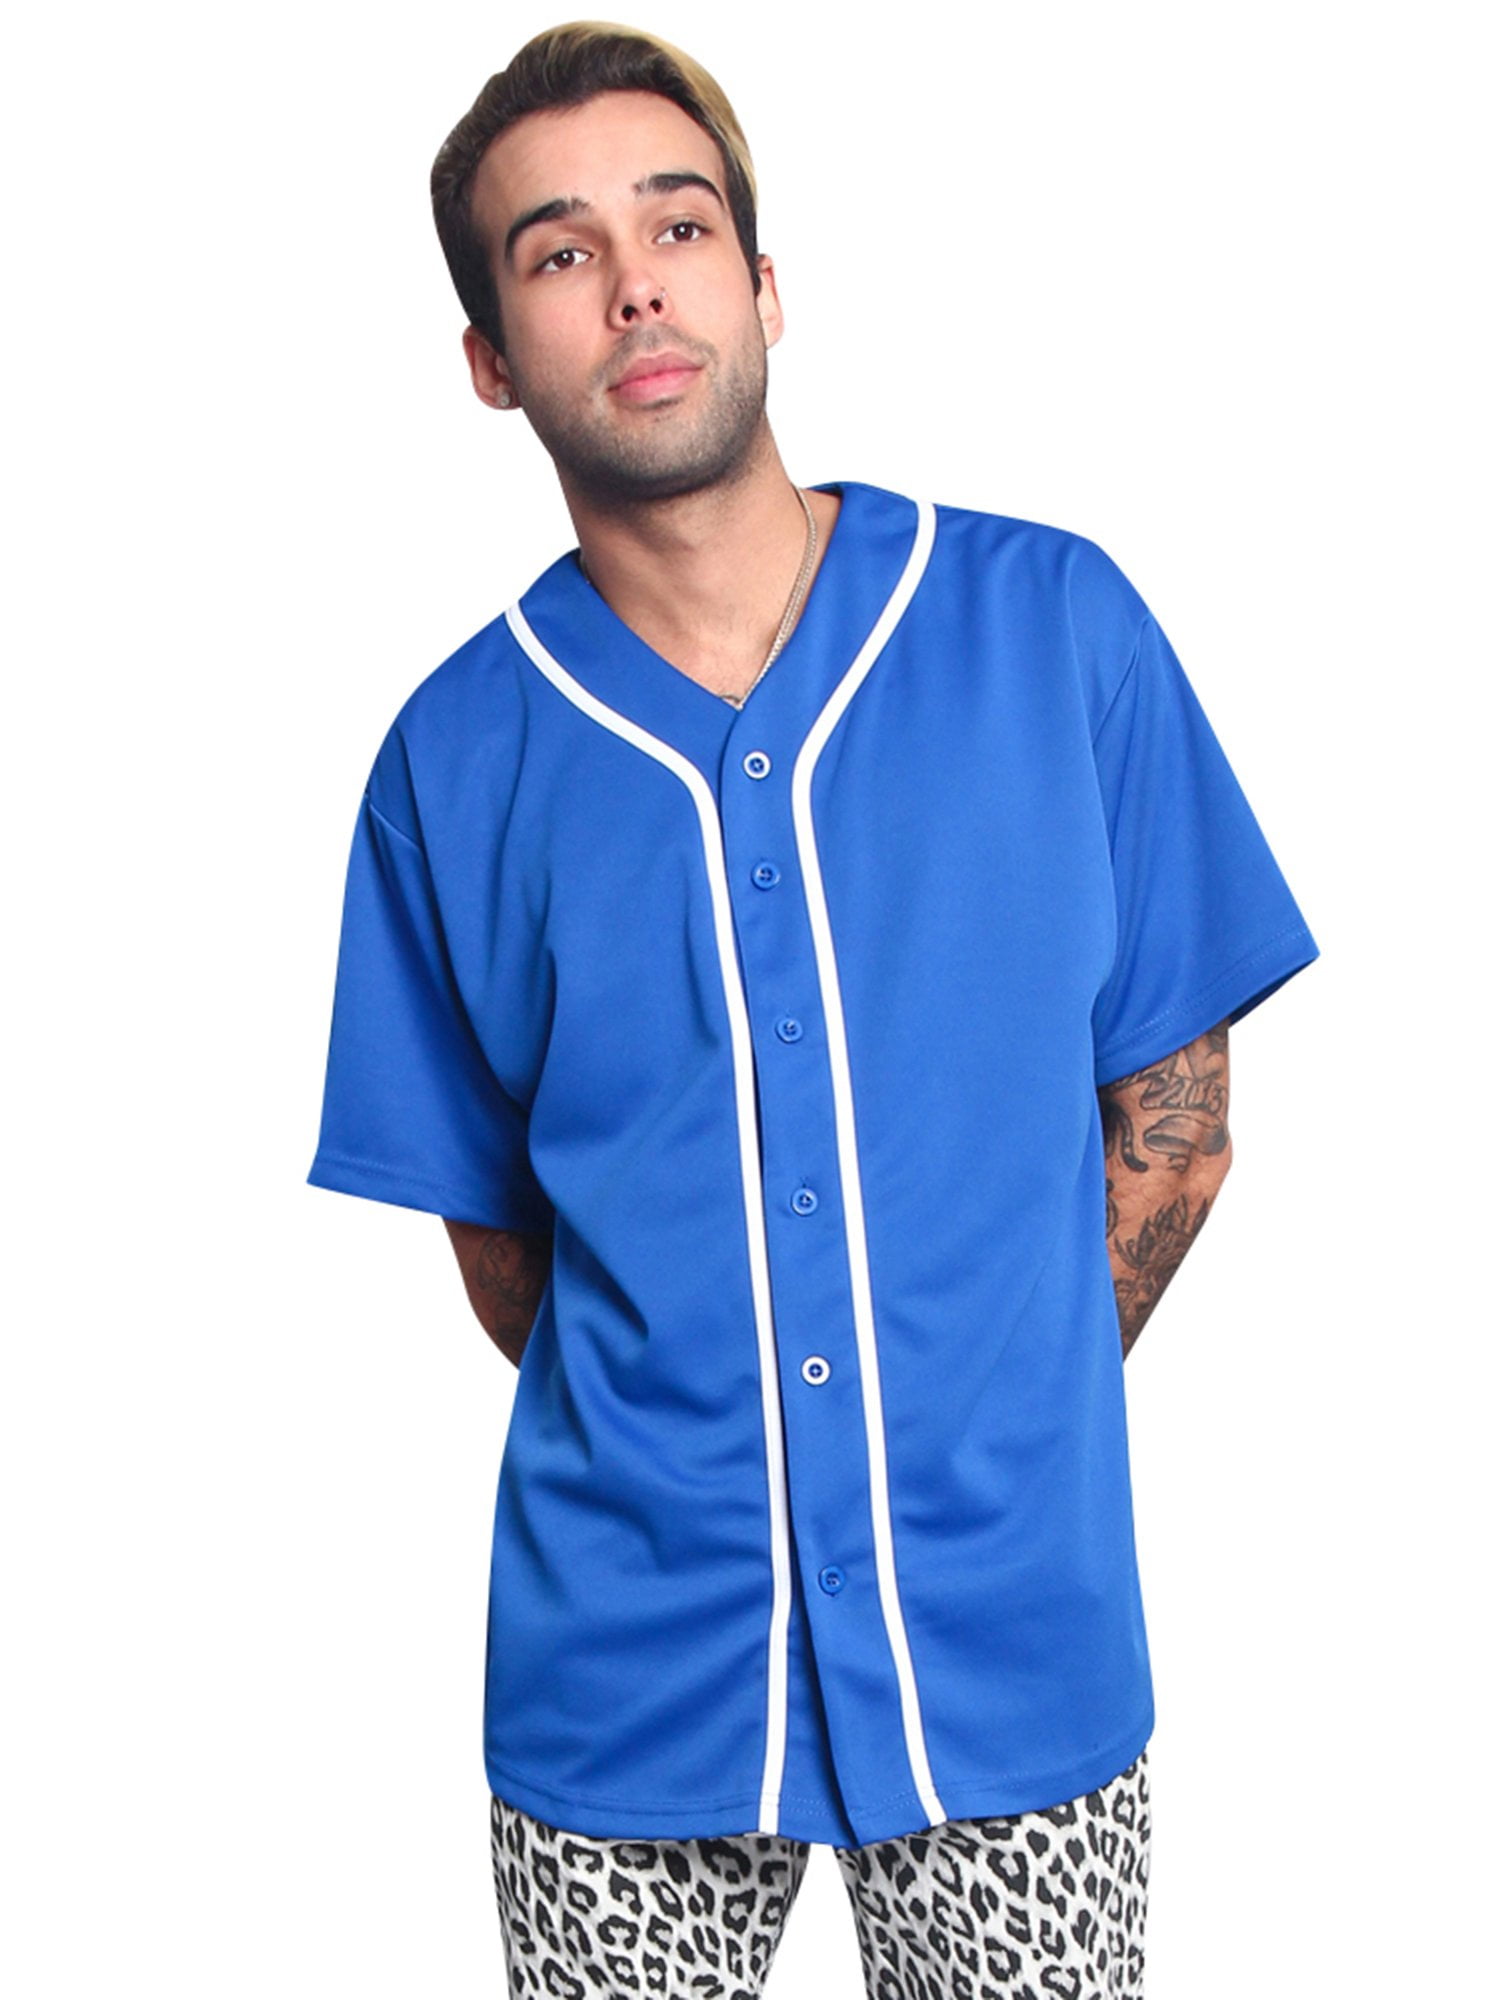 Victorious Men's Two Tone Baseball Jersey 